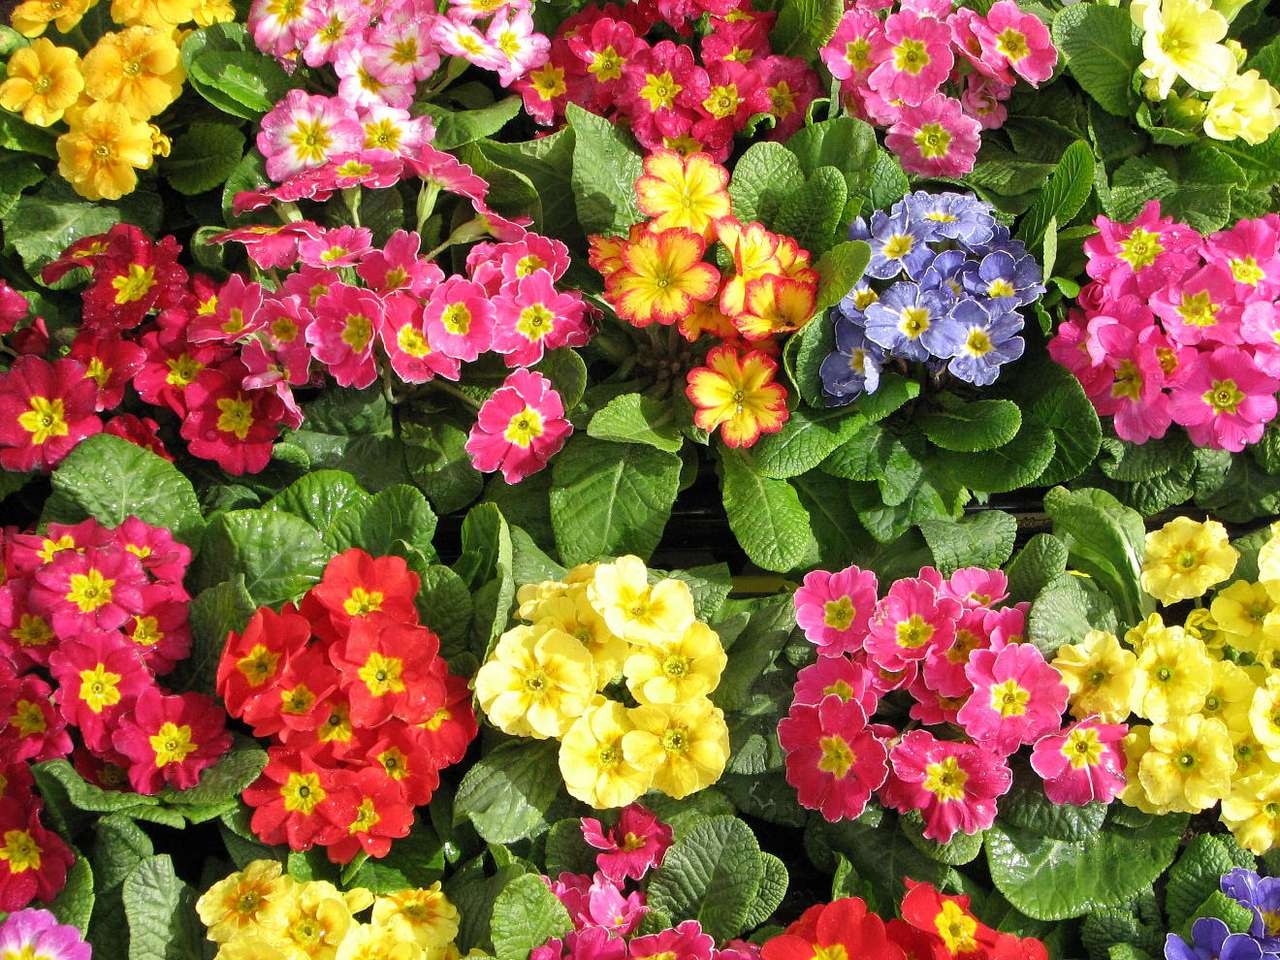 Primulas puzzle online from photo